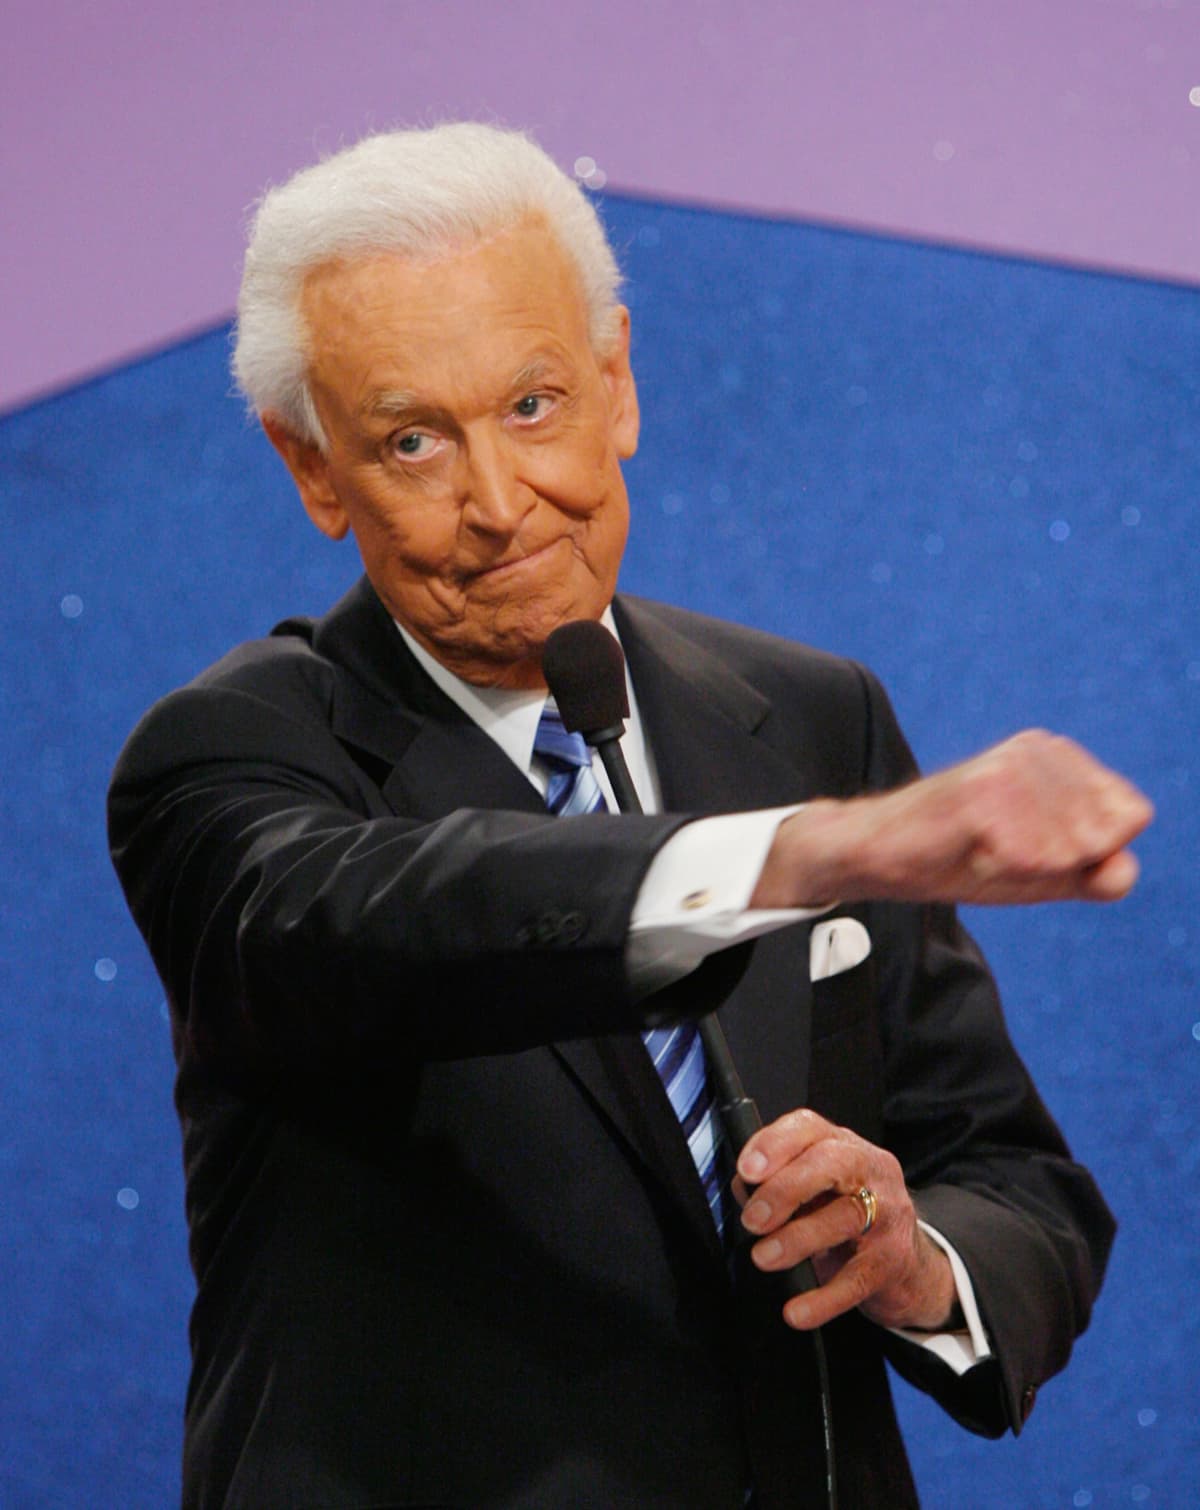 LOS ANGELES, CA - NOVEMBER 05:  Bob Barker attends the set of "The Price Is Right" to celebrate his 90th Birthday at CBS Television City on November 5, 2013 in Los Angeles, California.  (Photo by Paul Archuleta/FilmMagic)